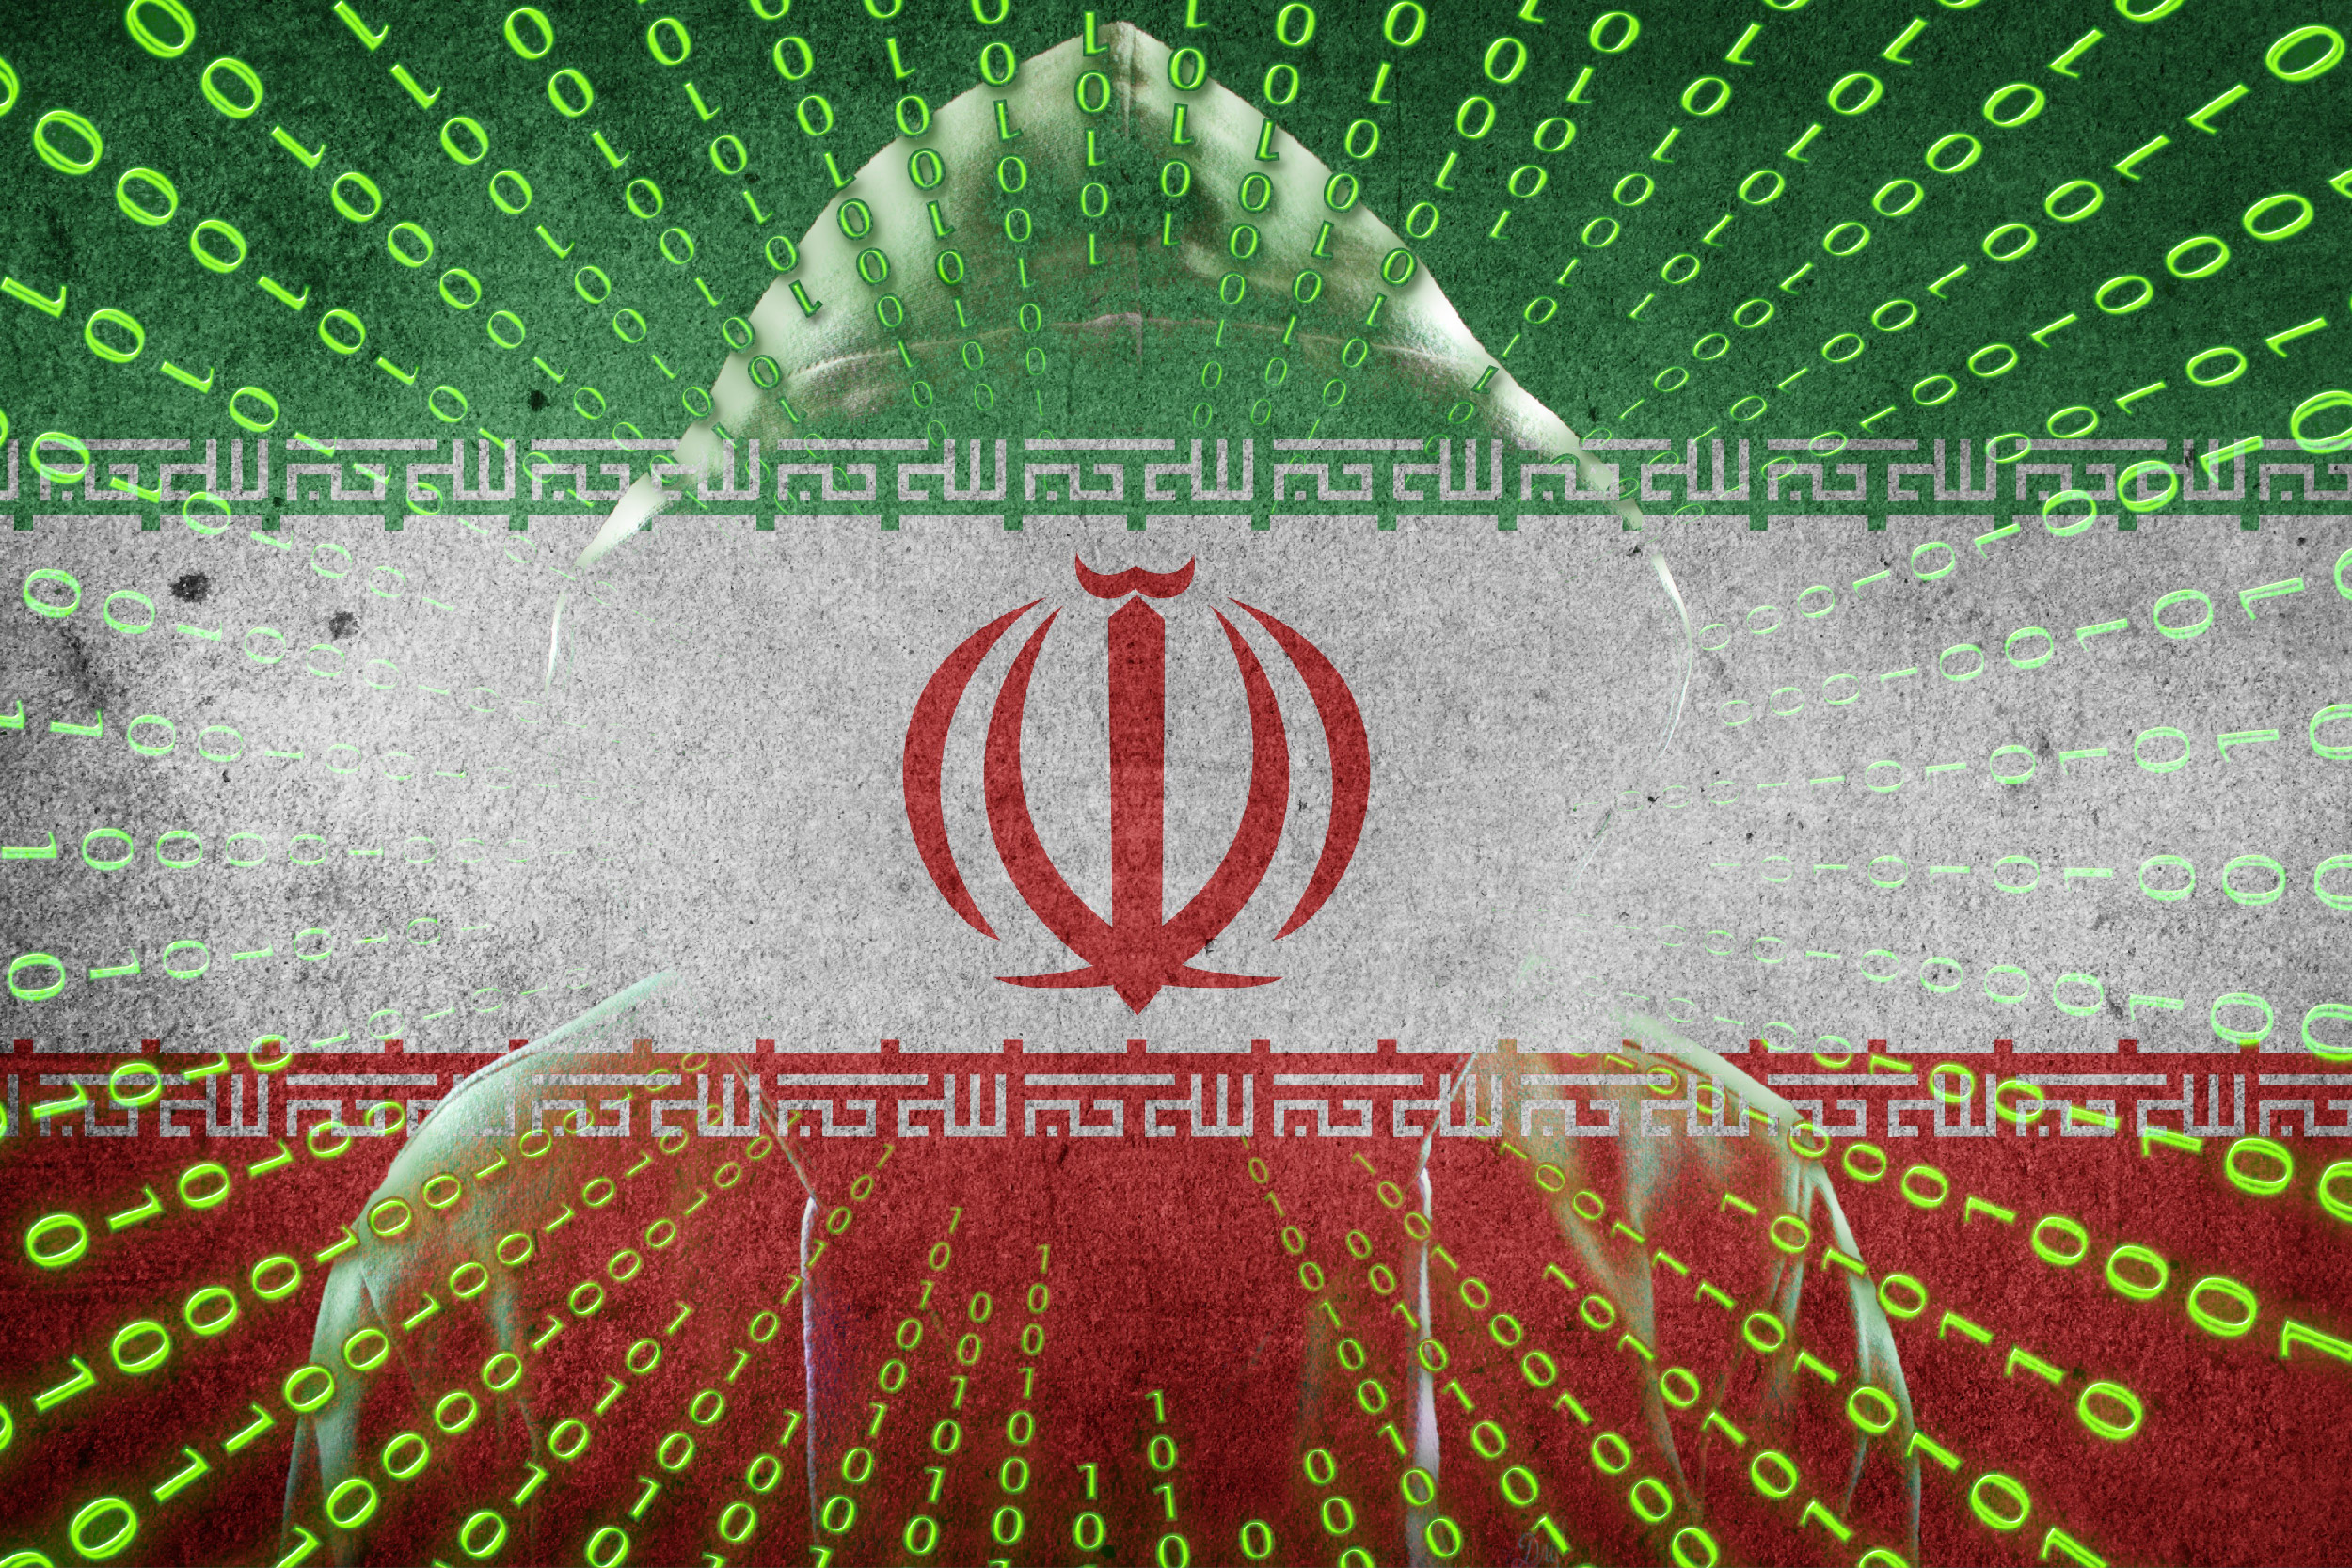 Iranian Hacking Group 'Mint Sandstorm' Targets US Critical Infrastructure in Retaliation to Iranian Attacks